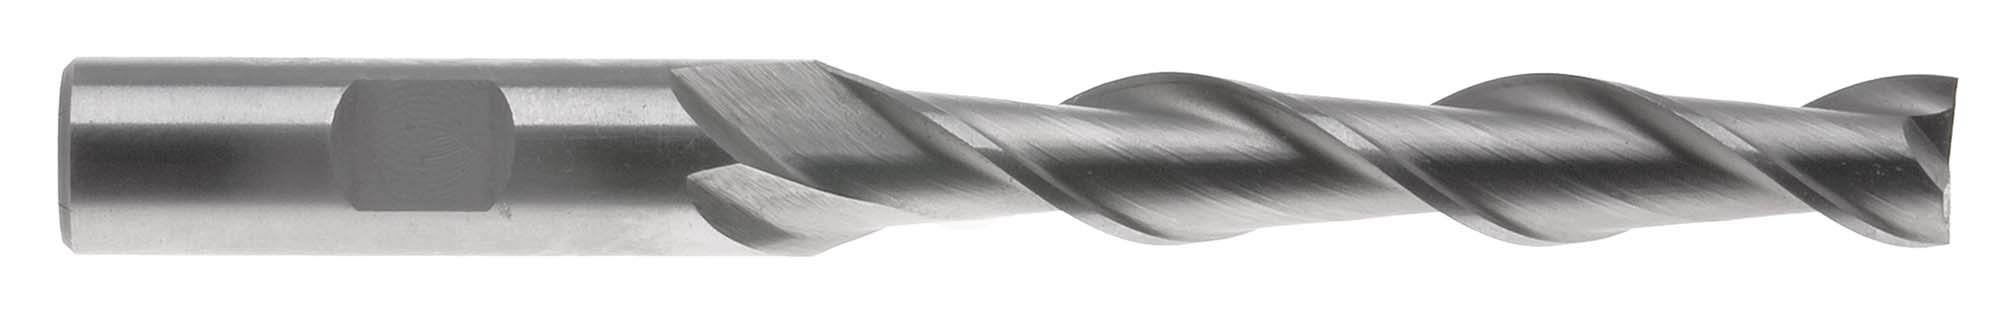 EM-AL8B  1/4"  Extra Long Aluminum Cutting 2 Flute End Mill with High Helix Flutes, 3/8" shank, High Speed Steel